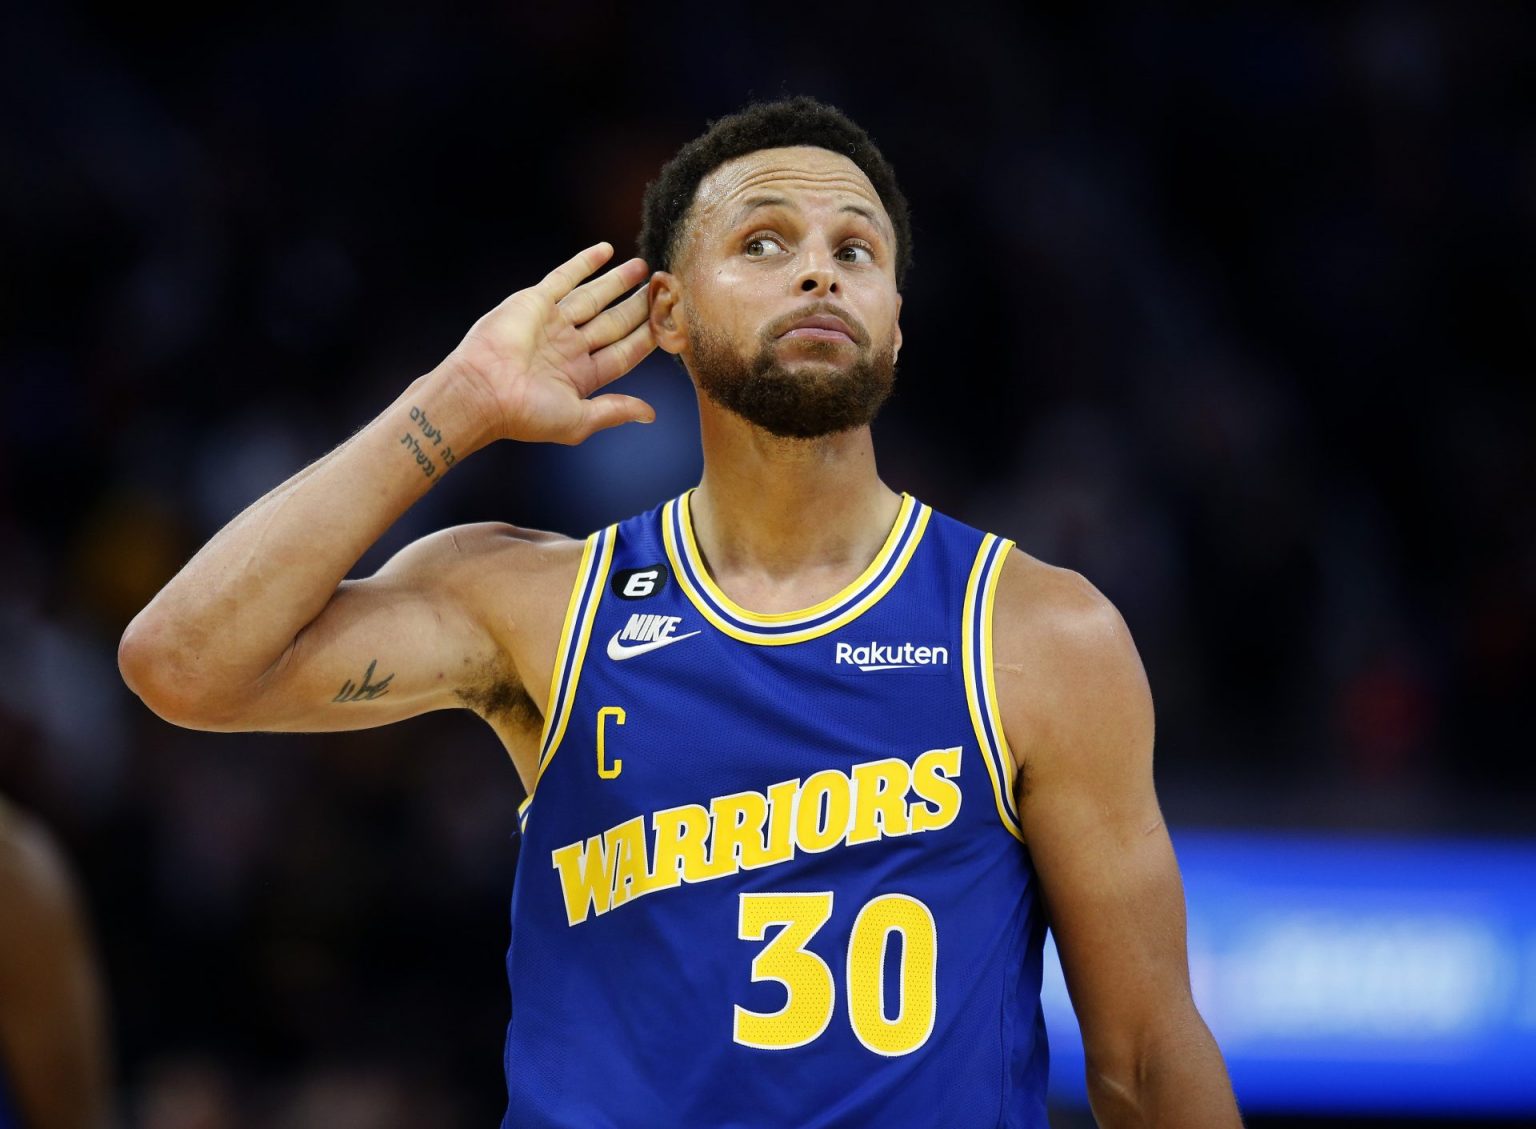 Steph Curry Could ‘Lose Big’ From FTX Collapse - CPA Practice Advisor